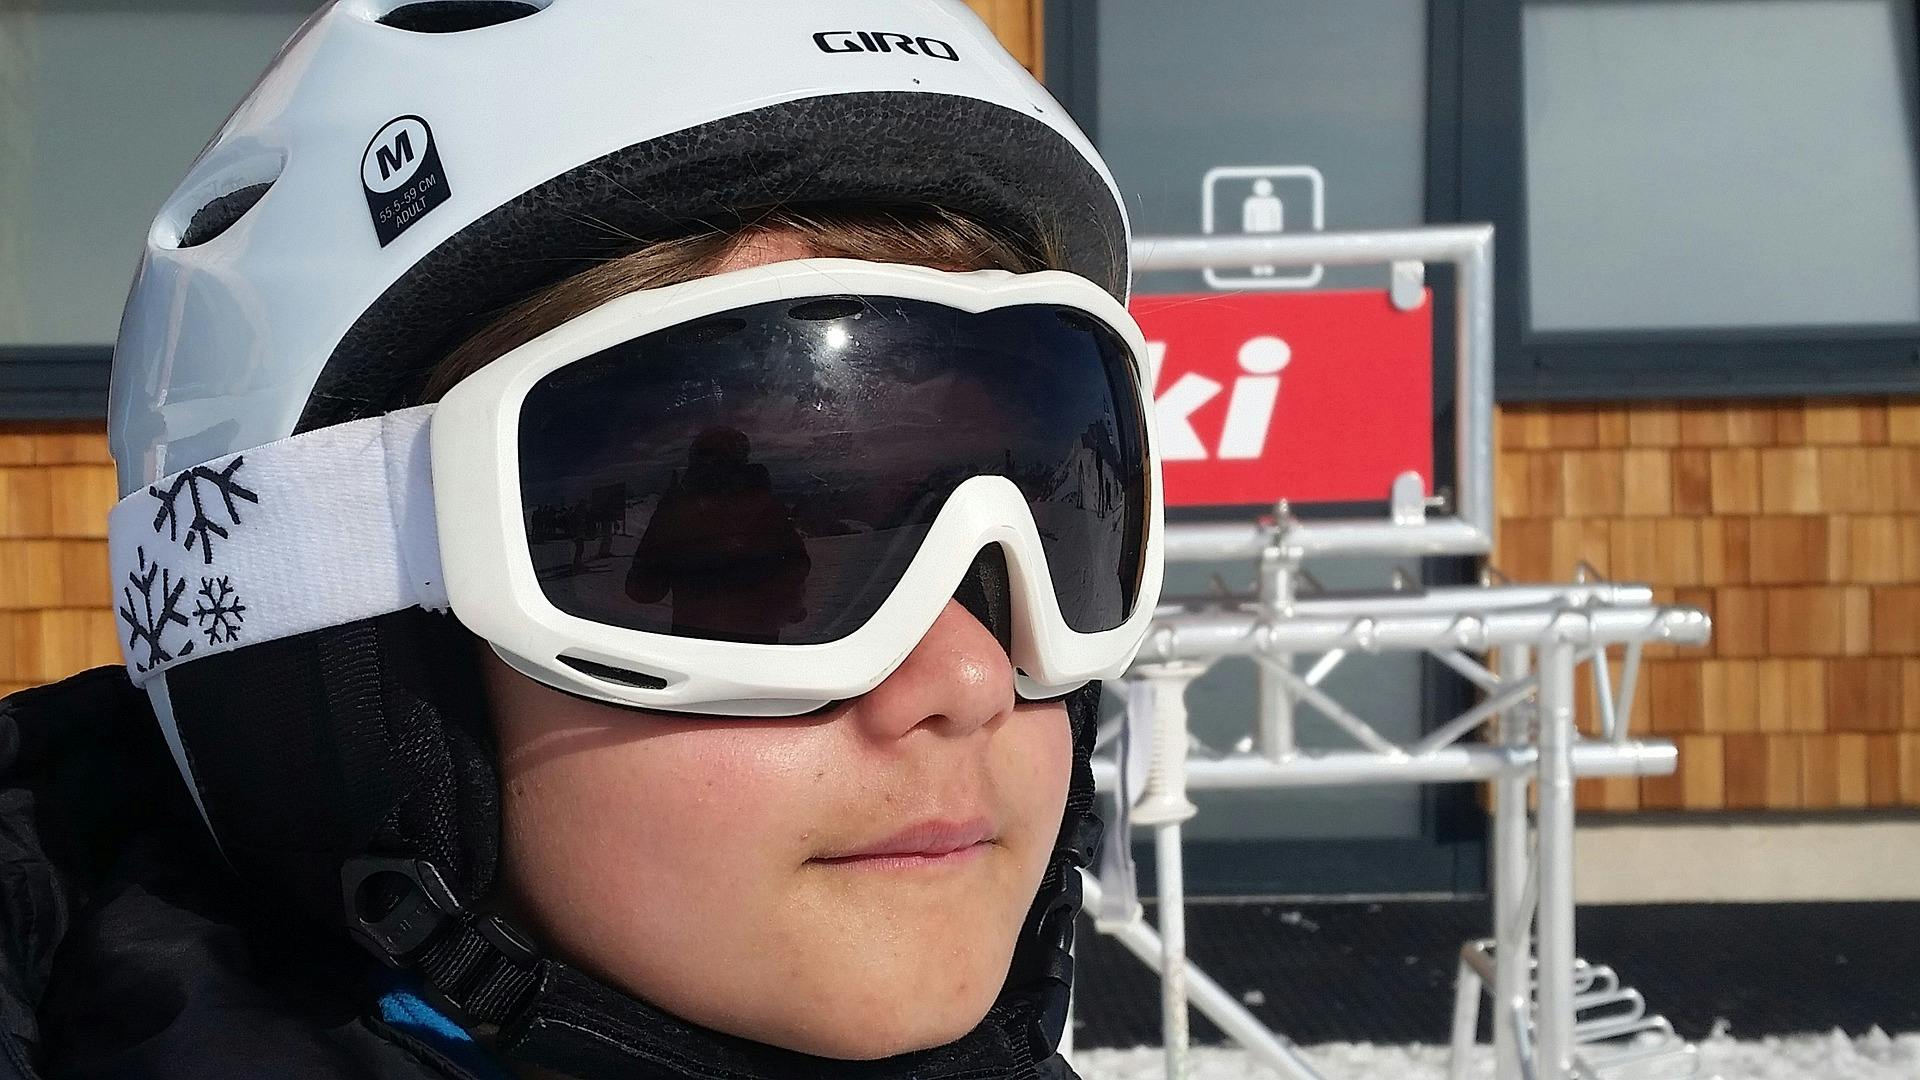 A skier wearing a helmet and goggles with a "gaper gap" showing.